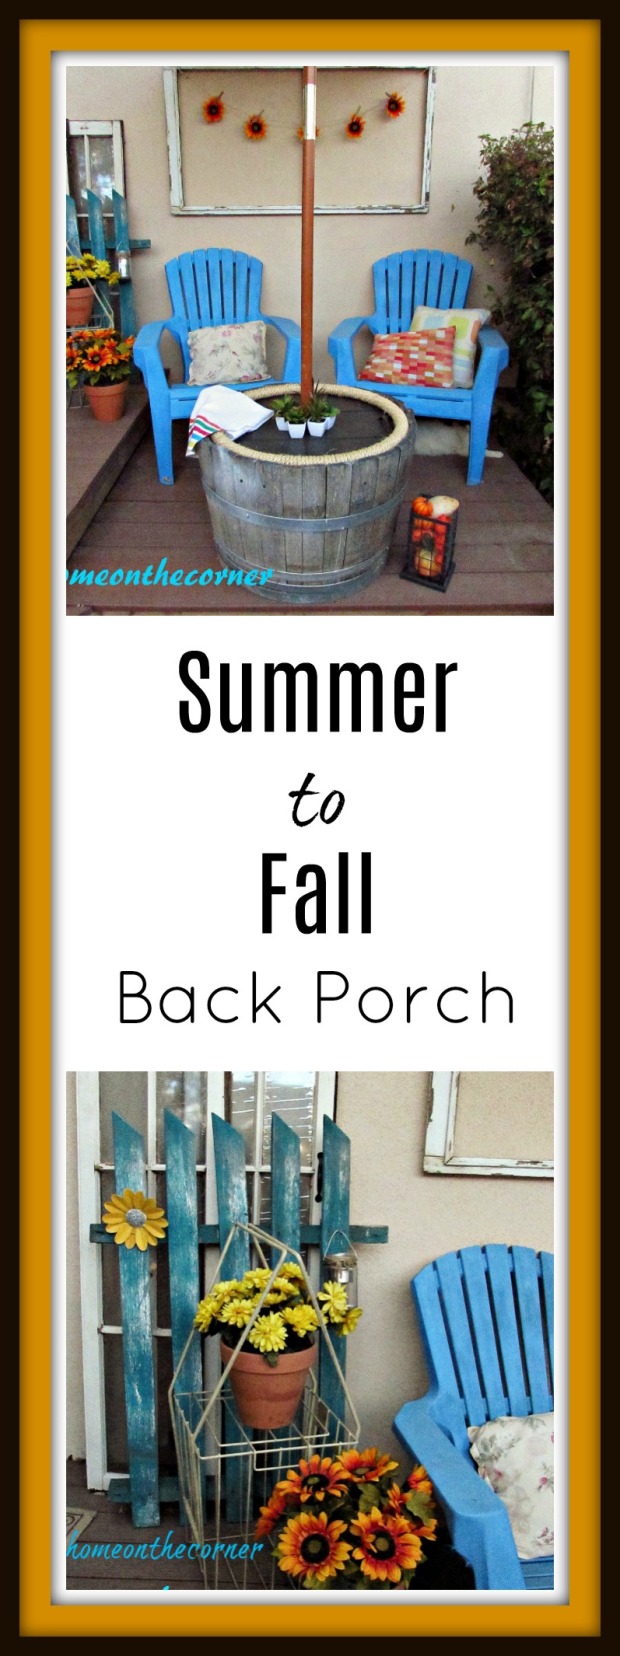 Summer to fall Back Porch Title